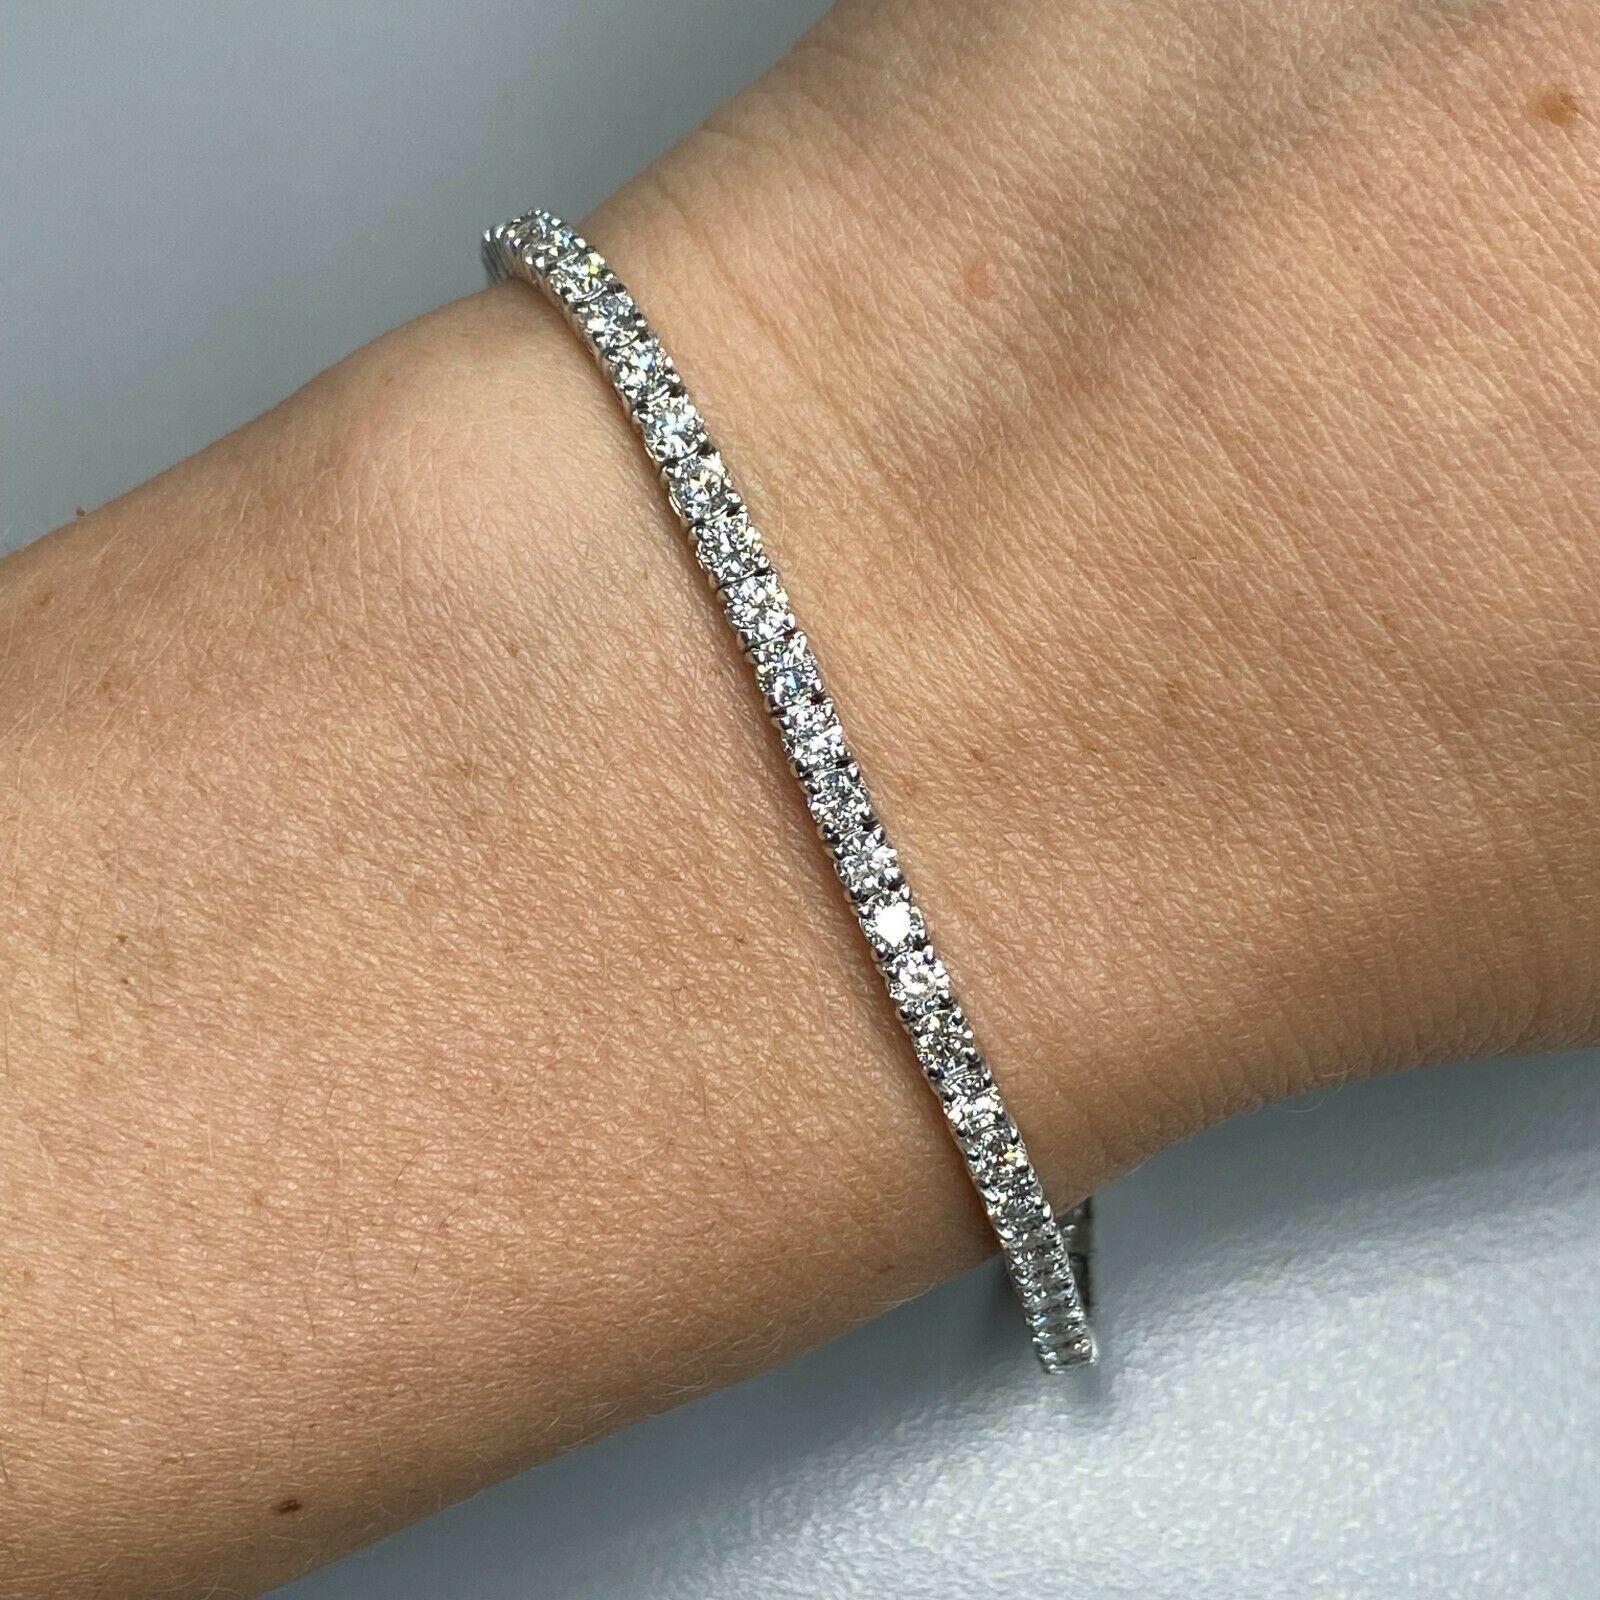 Specifications:
    main stone:ROUND DIAMONDS
    diamonds:64 PCS
    carat total weight:approximately 4.01 CTW
    color:g
    clarity:VS-SI
    brand:CUSTOM MADE
    metal:18K WHITE gold
    type:BRACELET
    weight:8.44 gr
    LENGHT:7 INCH
   